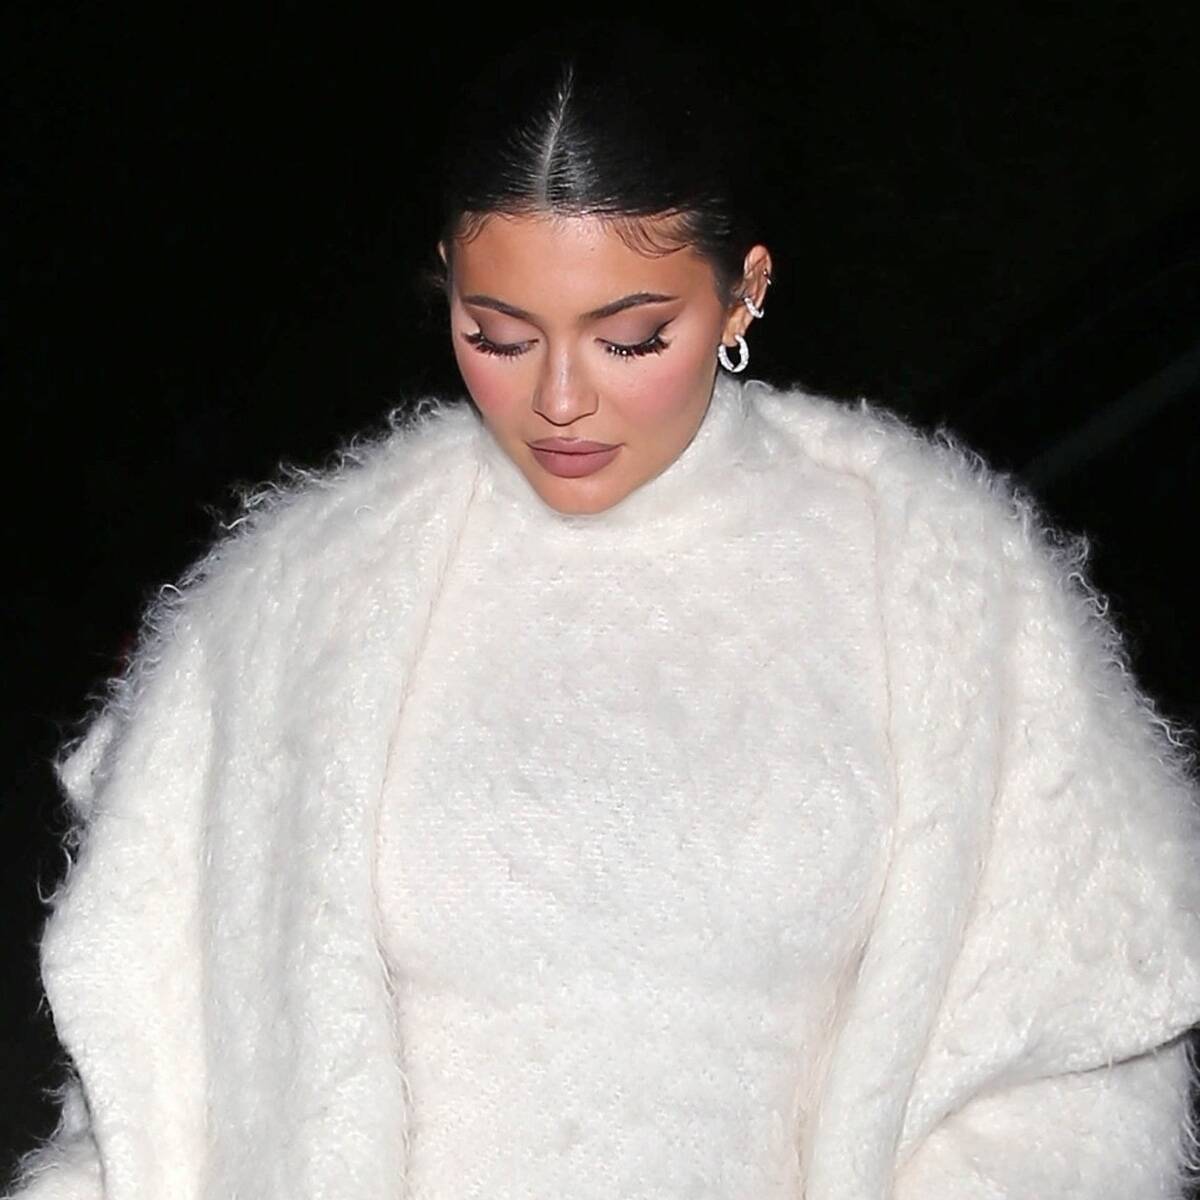 Kylie Jenner's Sexy White Outfit Will Remind You of Sharon Stone's Iconic '90s Look